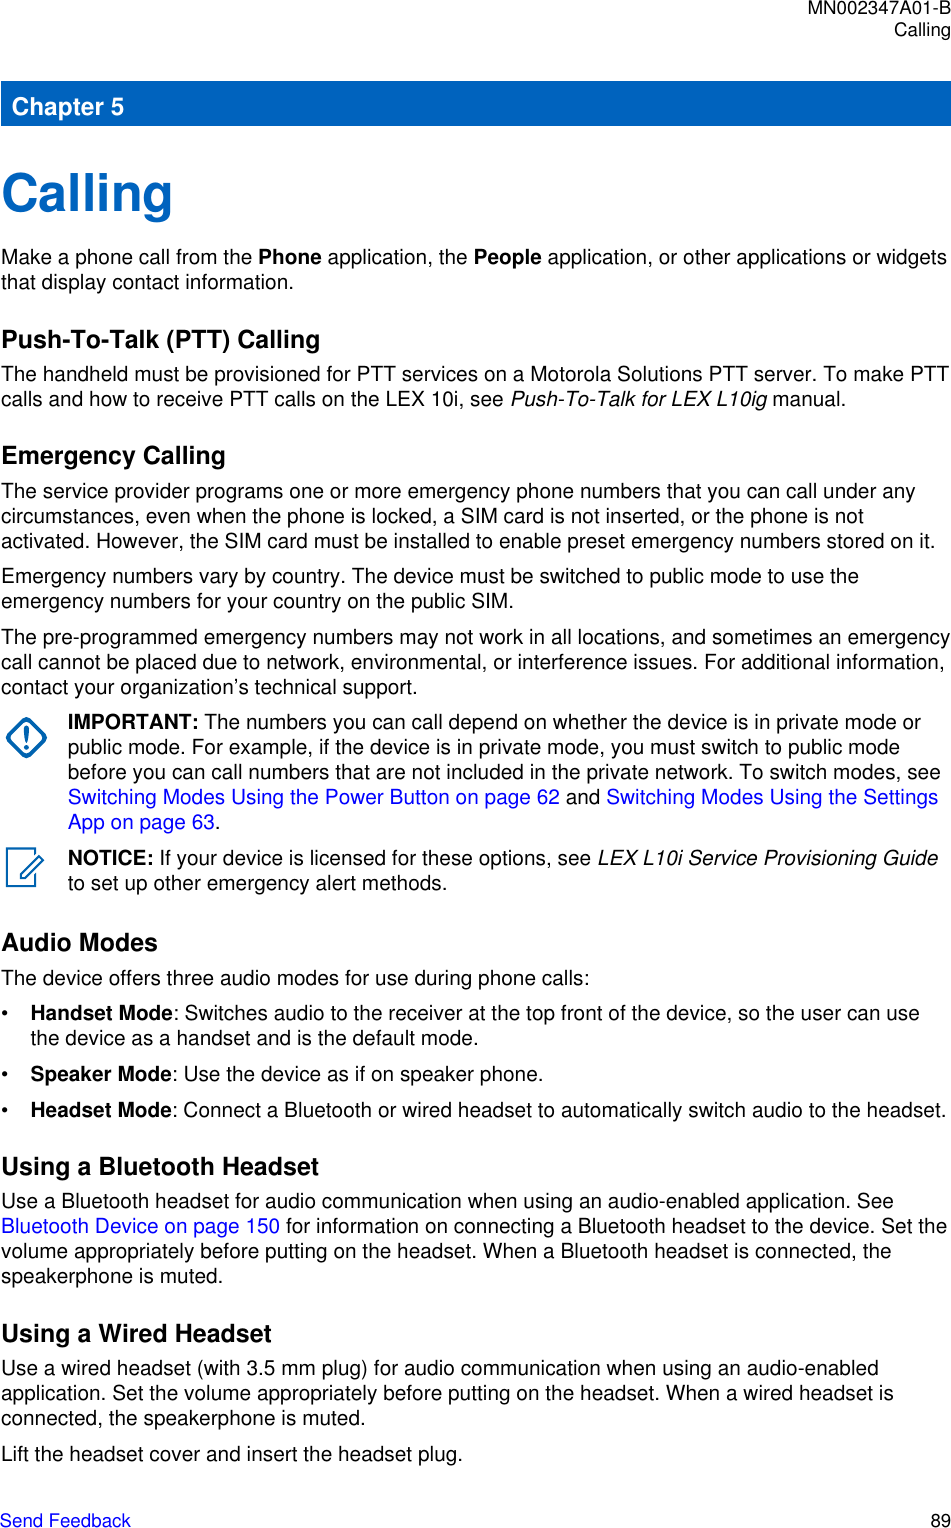 Chapter 5CallingMake a phone call from the Phone application, the People application, or other applications or widgetsthat display contact information.Push-To-Talk (PTT) CallingThe handheld must be provisioned for PTT services on a Motorola Solutions PTT server. To make PTTcalls and how to receive PTT calls on the LEX 10i, see Push-To-Talk for LEX L10ig manual.Emergency CallingThe service provider programs one or more emergency phone numbers that you can call under anycircumstances, even when the phone is locked, a SIM card is not inserted, or the phone is notactivated. However, the SIM card must be installed to enable preset emergency numbers stored on it.Emergency numbers vary by country. The device must be switched to public mode to use theemergency numbers for your country on the public SIM.The pre-programmed emergency numbers may not work in all locations, and sometimes an emergencycall cannot be placed due to network, environmental, or interference issues. For additional information,contact your organization’s technical support.IMPORTANT: The numbers you can call depend on whether the device is in private mode orpublic mode. For example, if the device is in private mode, you must switch to public modebefore you can call numbers that are not included in the private network. To switch modes, see Switching Modes Using the Power Button on page 62 and Switching Modes Using the SettingsApp on page 63.NOTICE: If your device is licensed for these options, see LEX L10i Service Provisioning Guideto set up other emergency alert methods.Audio ModesThe device offers three audio modes for use during phone calls:•Handset Mode: Switches audio to the receiver at the top front of the device, so the user can usethe device as a handset and is the default mode.•Speaker Mode: Use the device as if on speaker phone.•Headset Mode: Connect a Bluetooth or wired headset to automatically switch audio to the headset.Using a Bluetooth HeadsetUse a Bluetooth headset for audio communication when using an audio-enabled application. See Bluetooth Device on page 150 for information on connecting a Bluetooth headset to the device. Set thevolume appropriately before putting on the headset. When a Bluetooth headset is connected, thespeakerphone is muted.Using a Wired HeadsetUse a wired headset (with 3.5 mm plug) for audio communication when using an audio-enabledapplication. Set the volume appropriately before putting on the headset. When a wired headset isconnected, the speakerphone is muted.Lift the headset cover and insert the headset plug.MN002347A01-BCallingSend Feedback   89